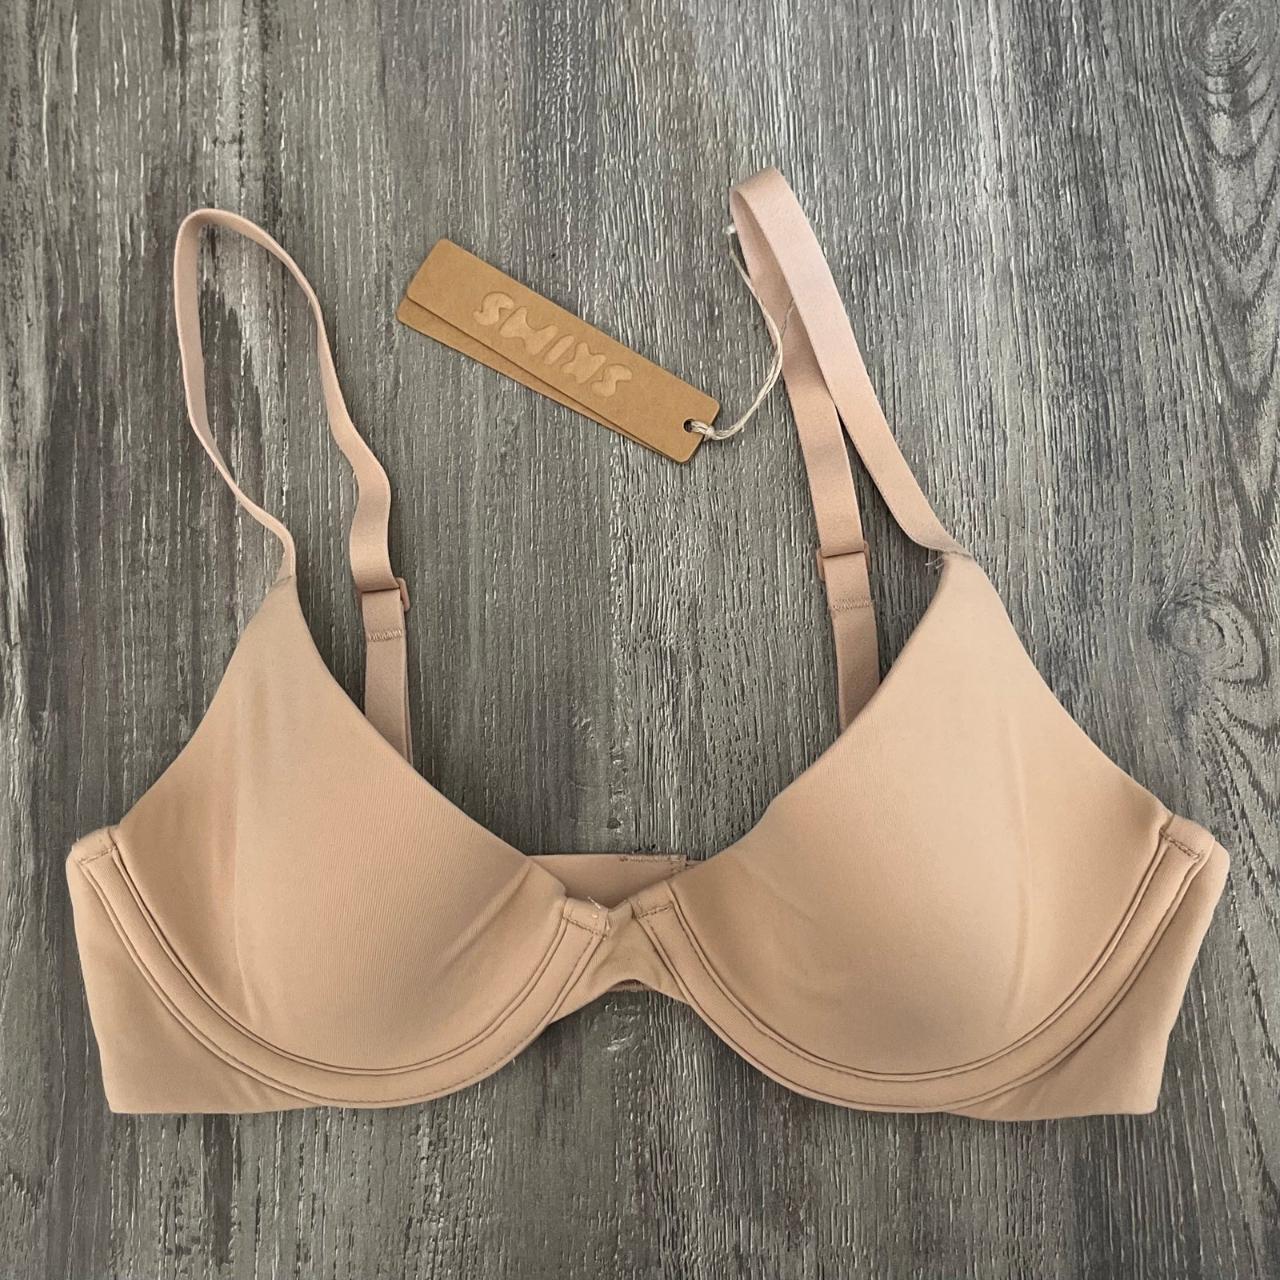 New Skims Fits Everybody Plunge Bra in Clay. Size 32A - Depop